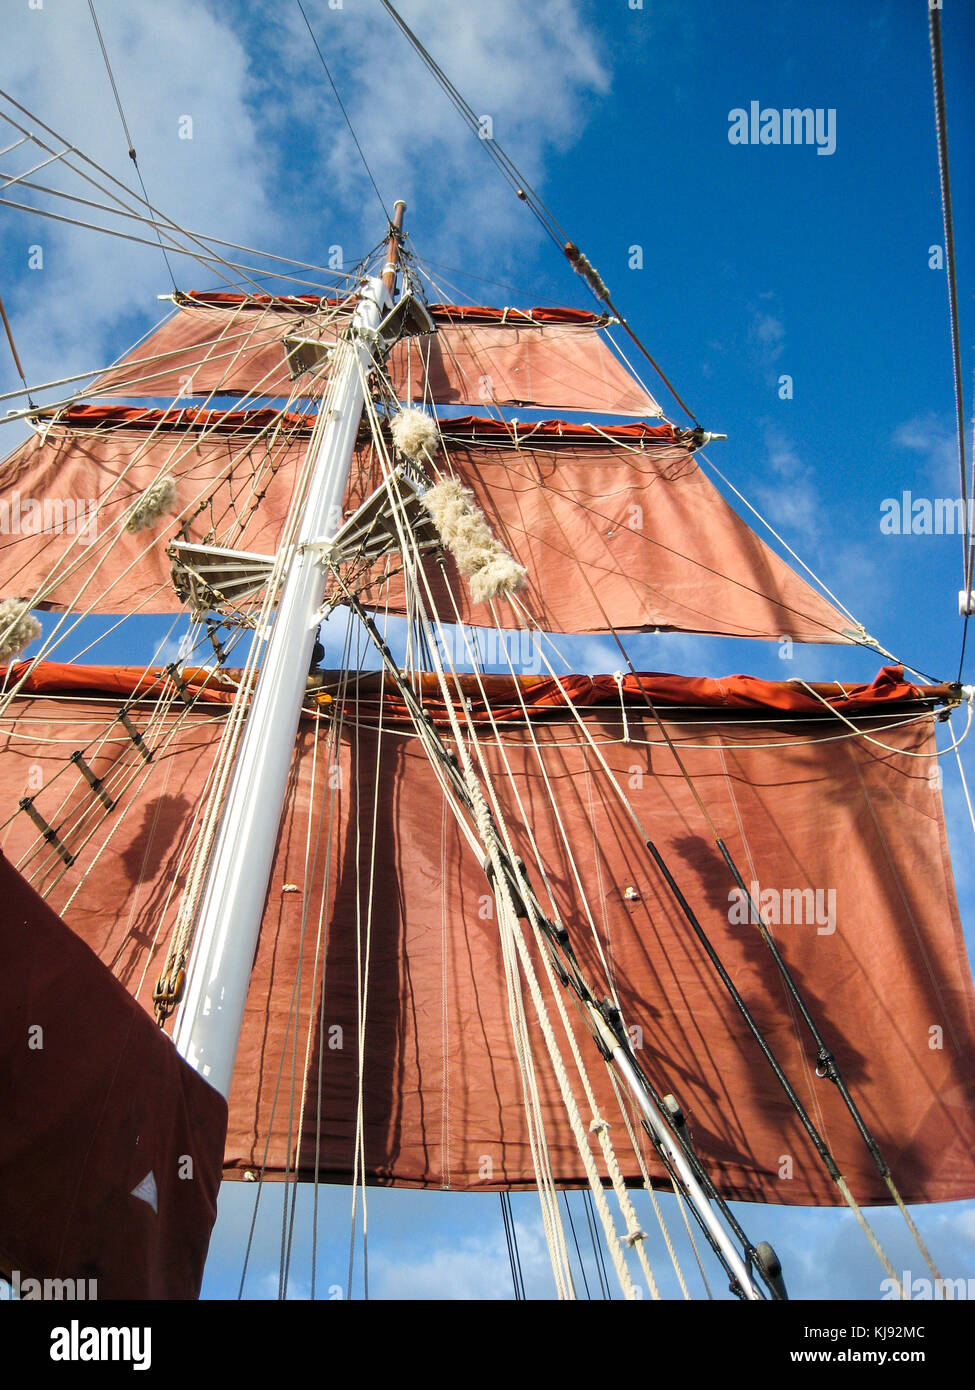 Looking up at the mast of a tea clipper on a clear sunny day Stock Photo